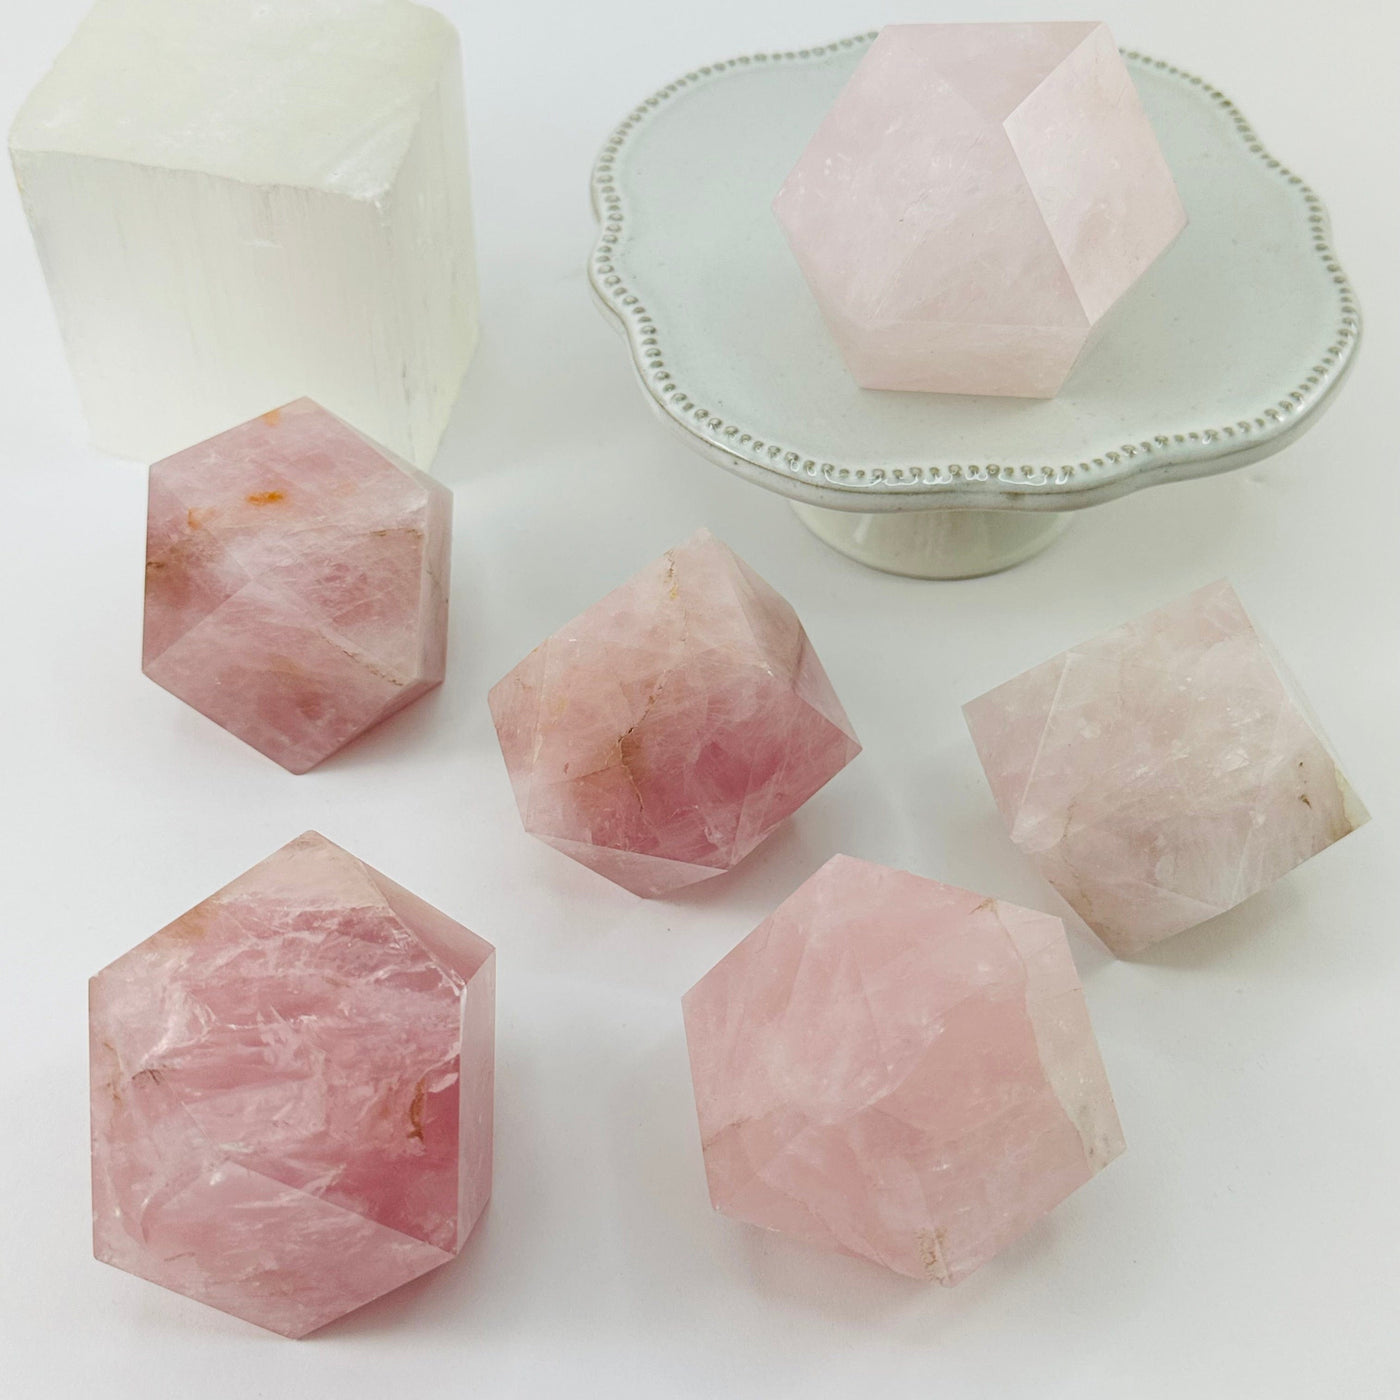 multiple rose quartz geometric shapes displayed to show the differences in the sizes and color shades 